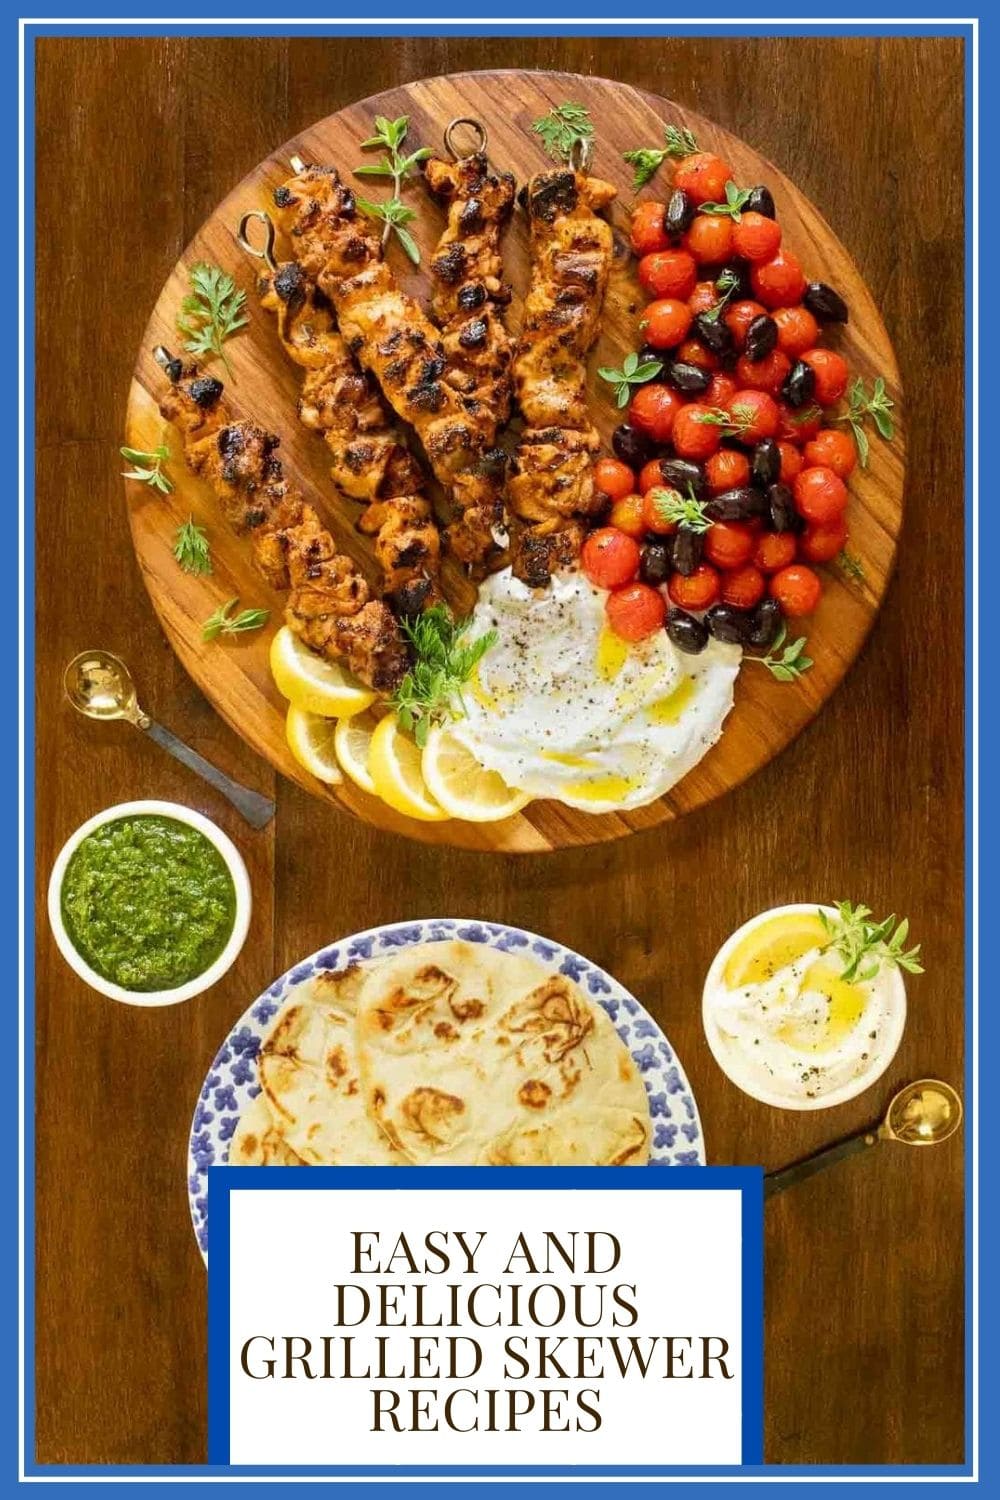 Six Fabulous Grilled Skewer Recipes You\'ll Want to Make All Summer Long!